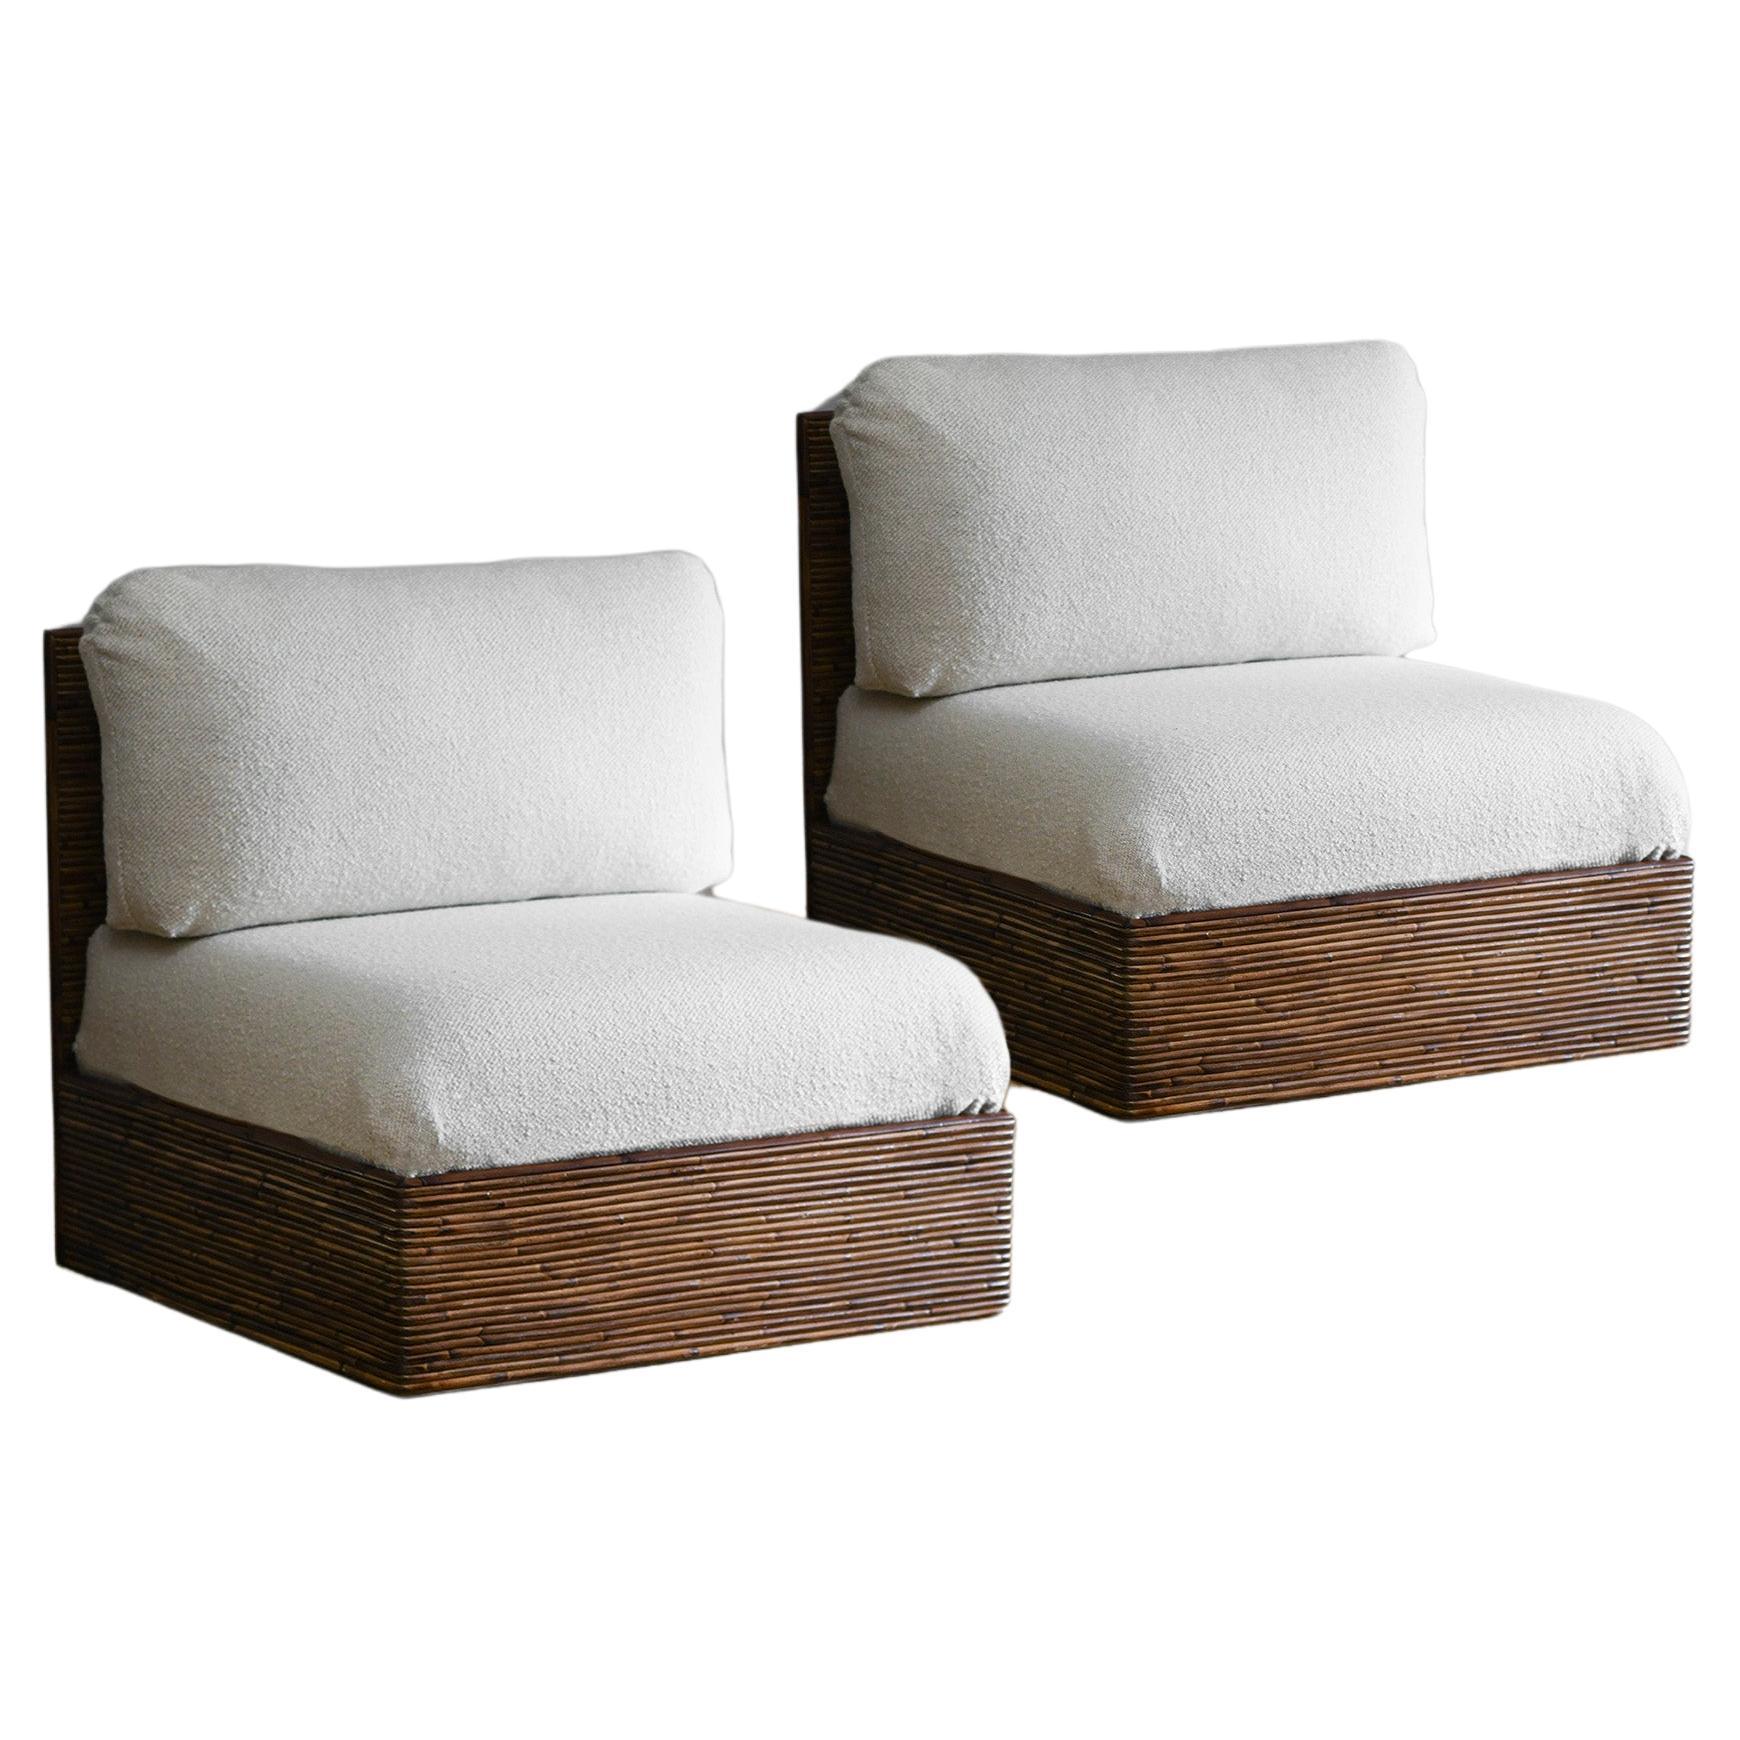 Fabric Modular bamboo sofa Molto Editions complete with cushions in Dedar fabric For Sale